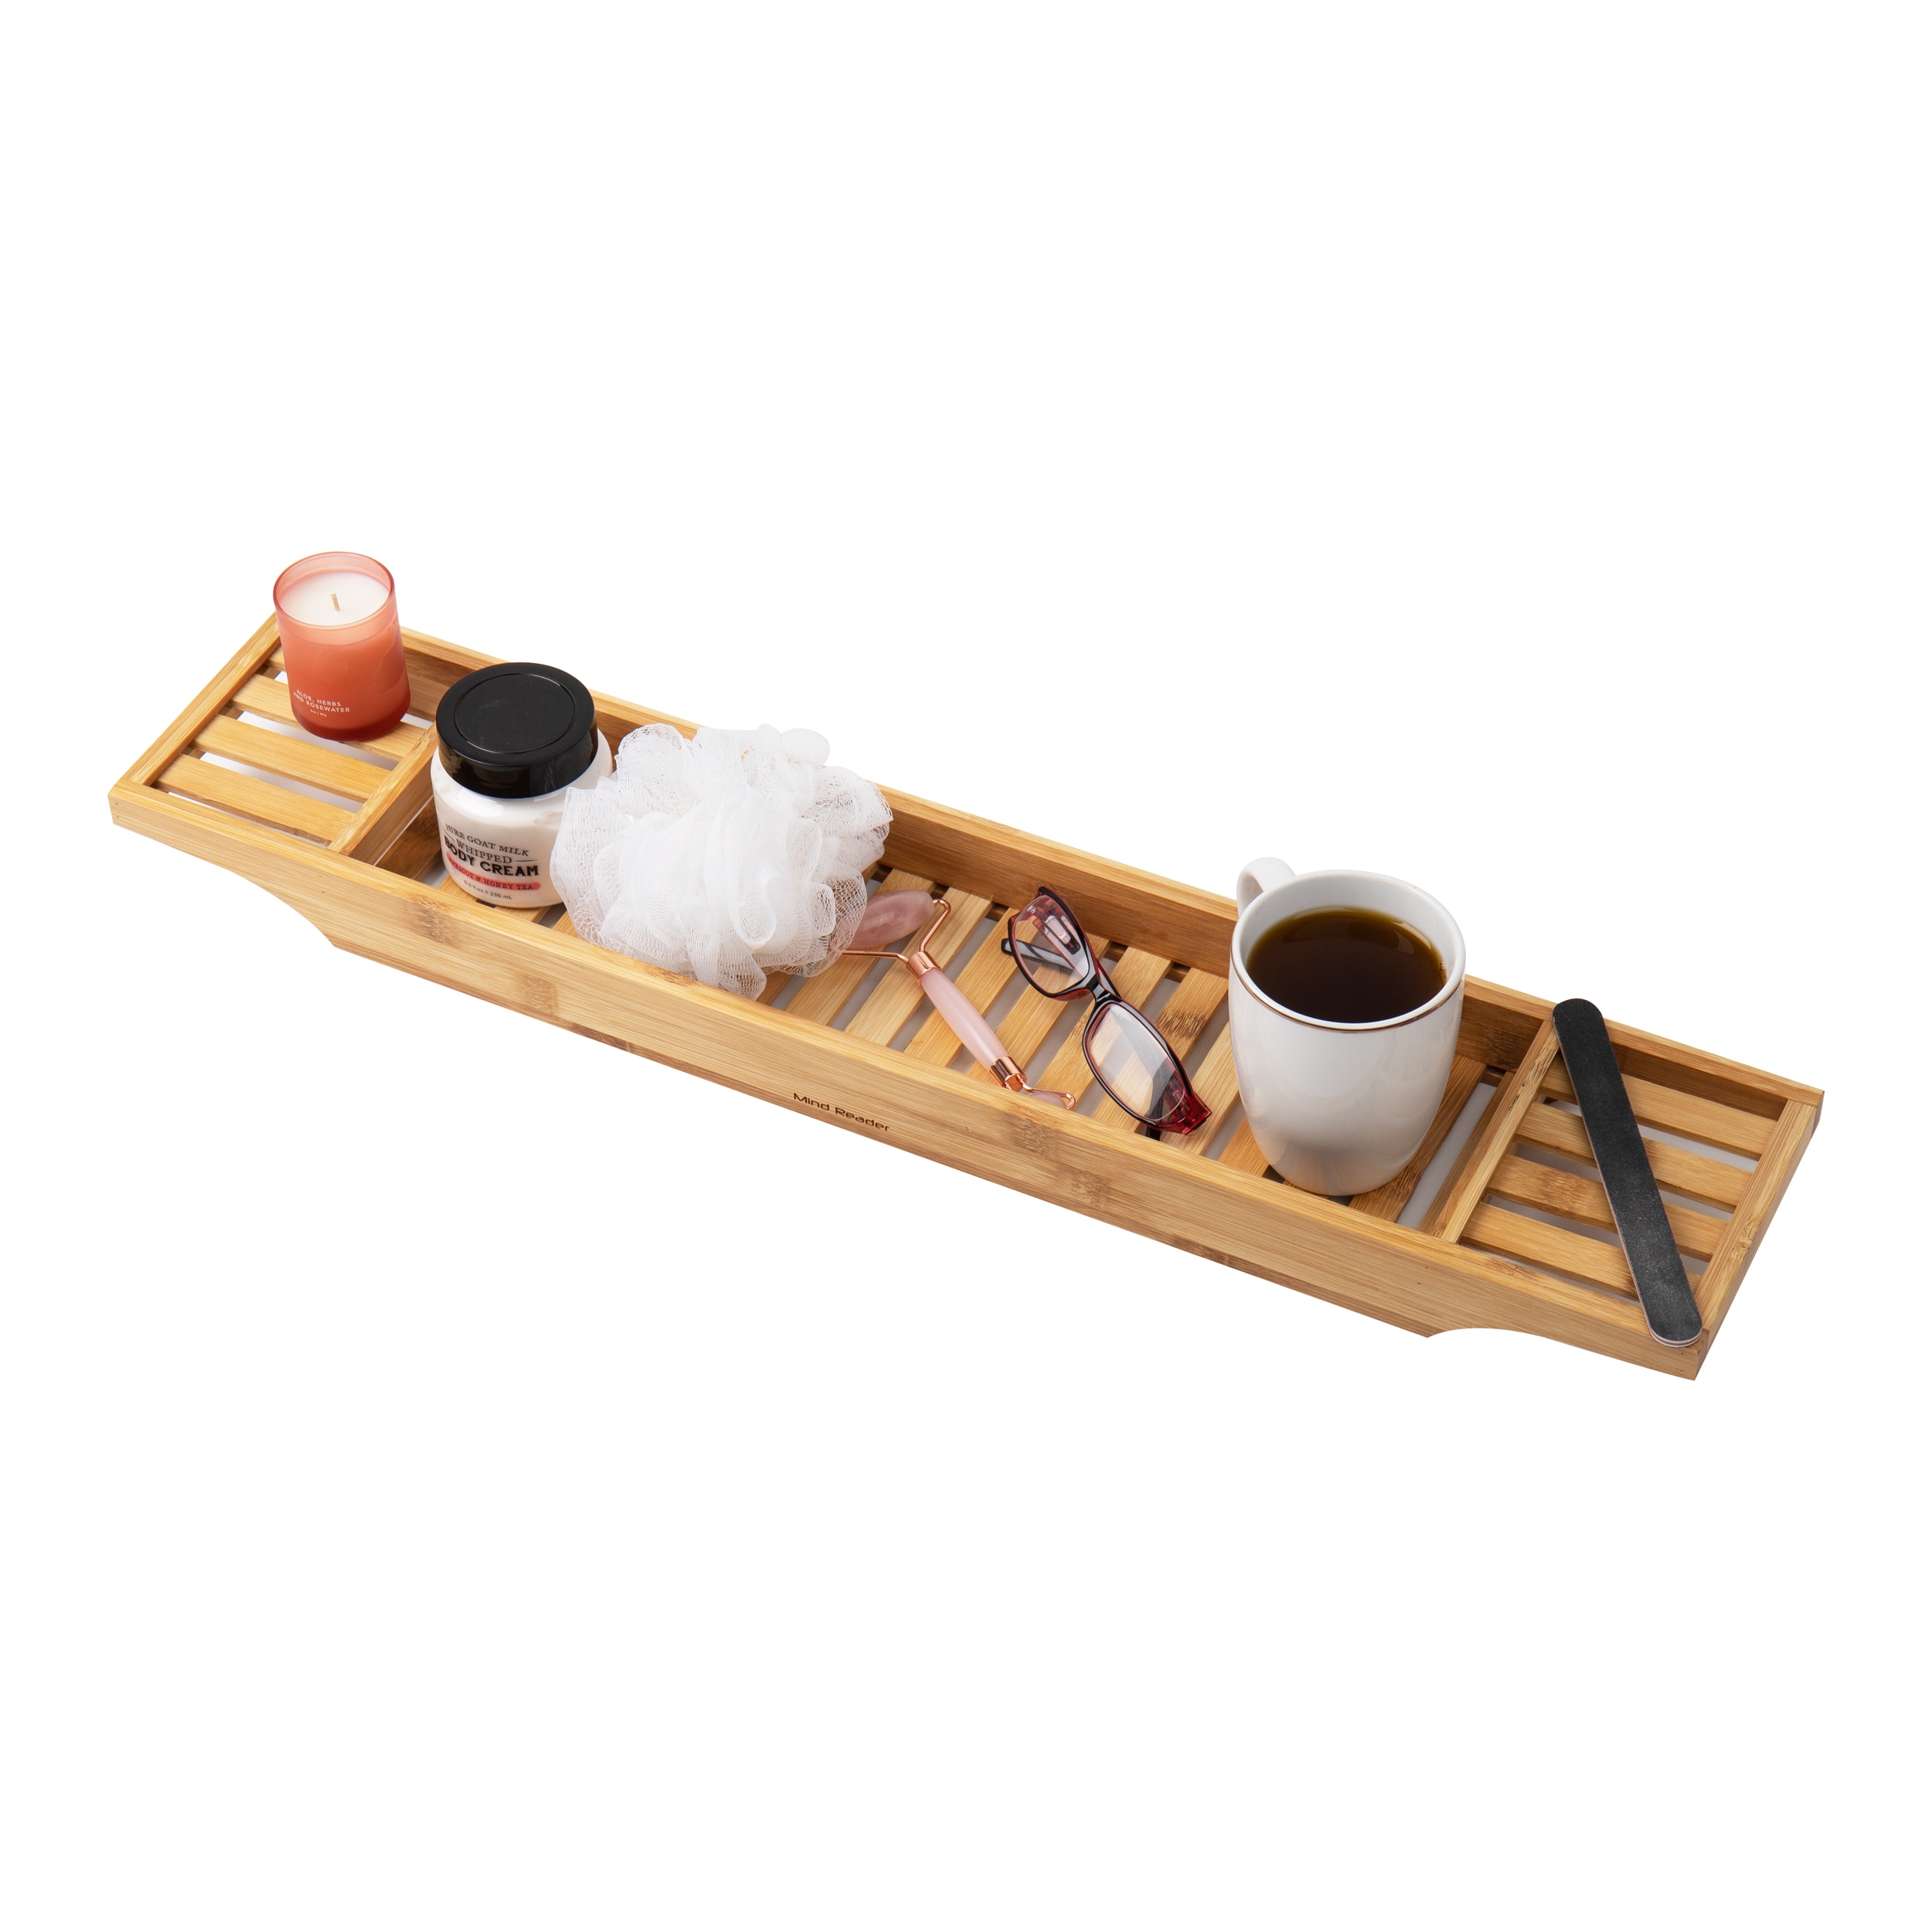 Homemaid Living Bamboo Bathtub Tray - Perfect Expandable Bathtub Caddy with Reading Rack or